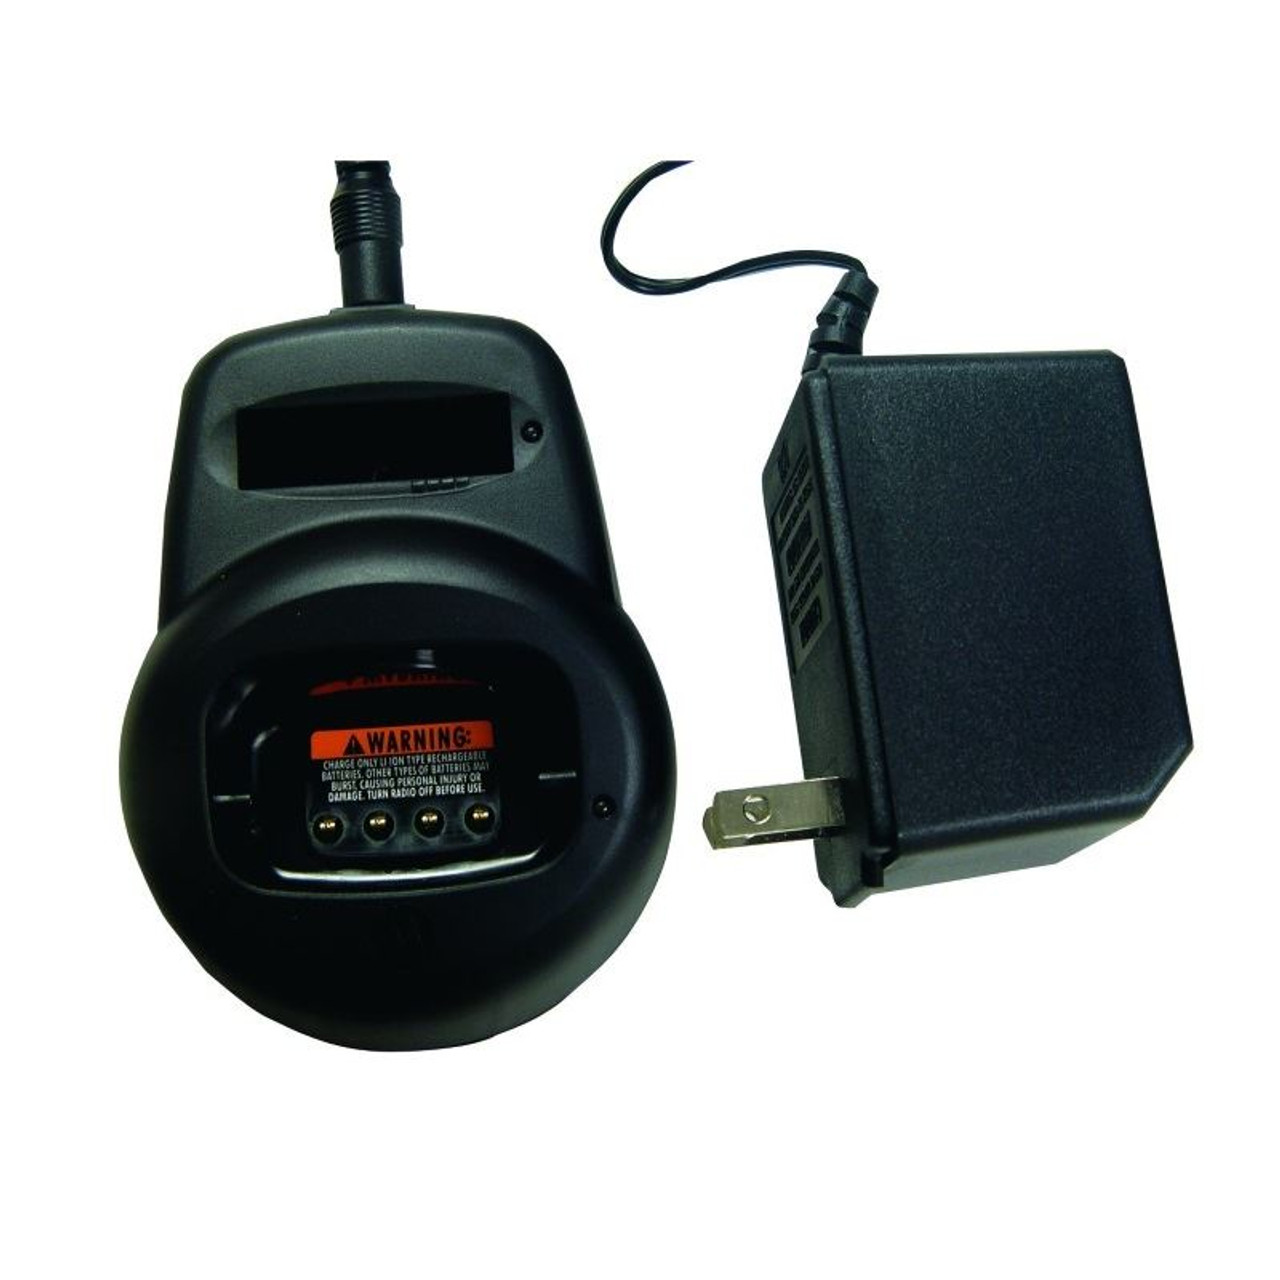 Motorola 56553 Rapid Desktop Charger with AC Adapter is a replacement or  spare for the CLS 1110 CLS 1410 series radios. Get one for your office or  retail store.